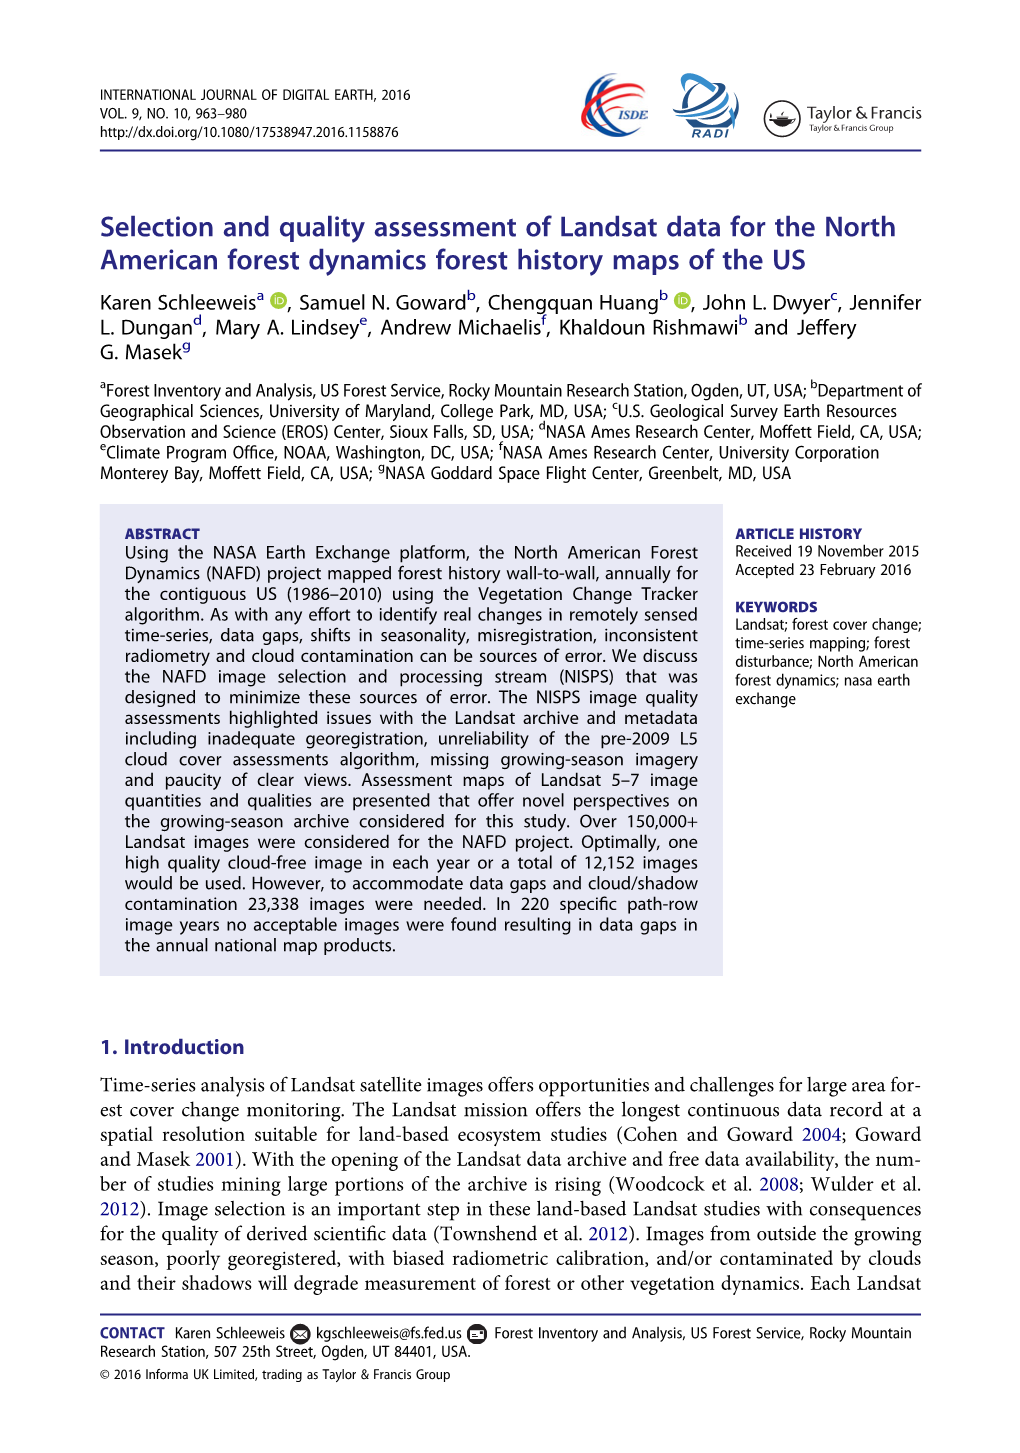 Selection and Quality Assessment of Landsat Data for the North American Forest Dynamics Forest History Maps of the US